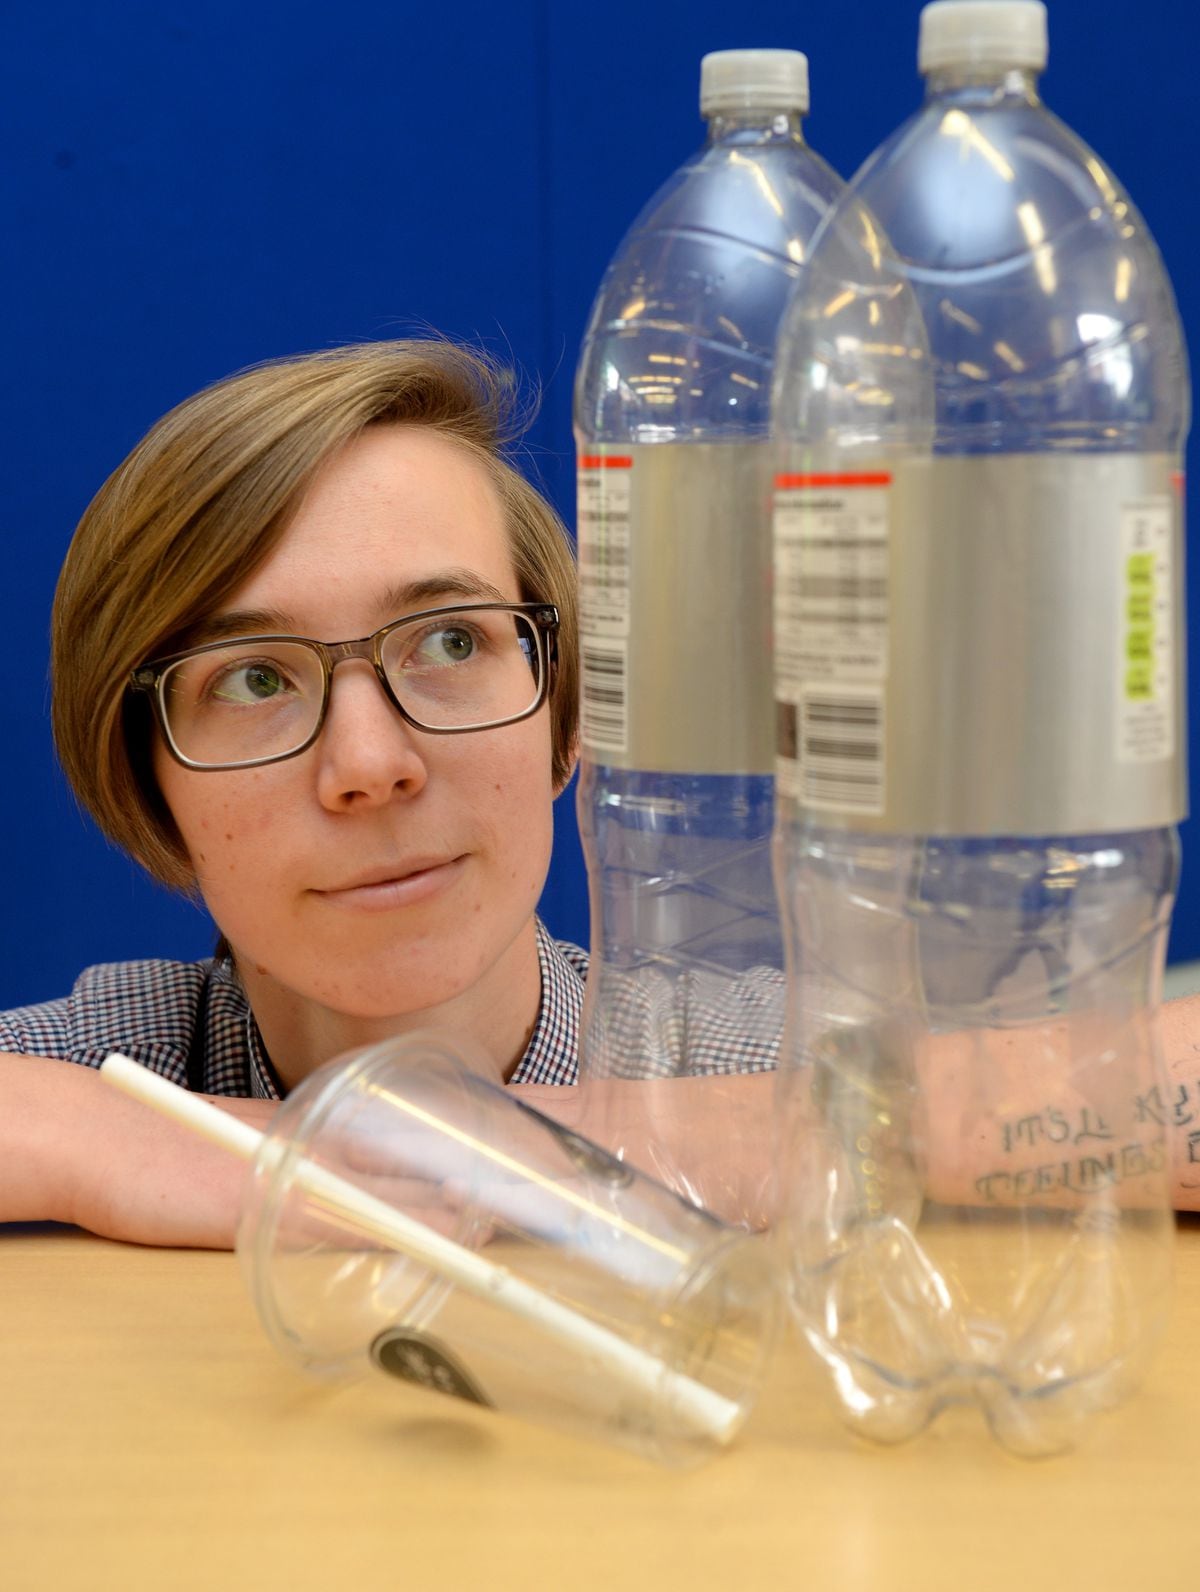 Market Drayton Library is supporting Plastic Free July and will host a talk from Generation Zero Carbon next month. Pictured is library assistant Jessie Wolf